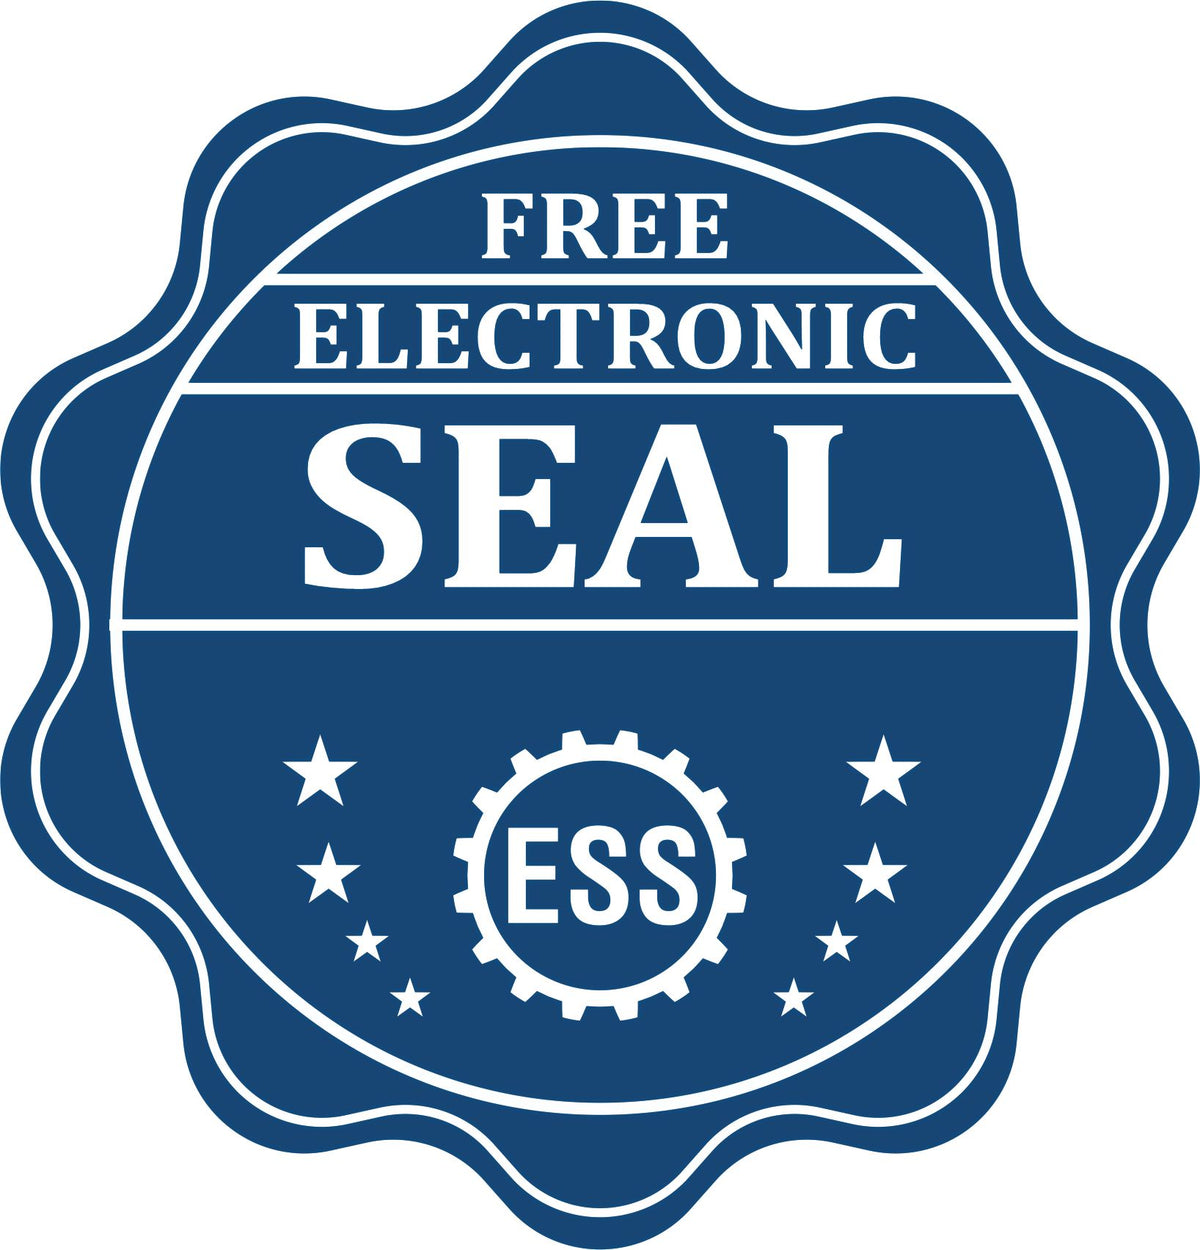 A badge showing a free electronic seal for the Premium MaxLight Pre-Inked Maryland Engineering Stamp with stars and the ESS gear on the emblem.